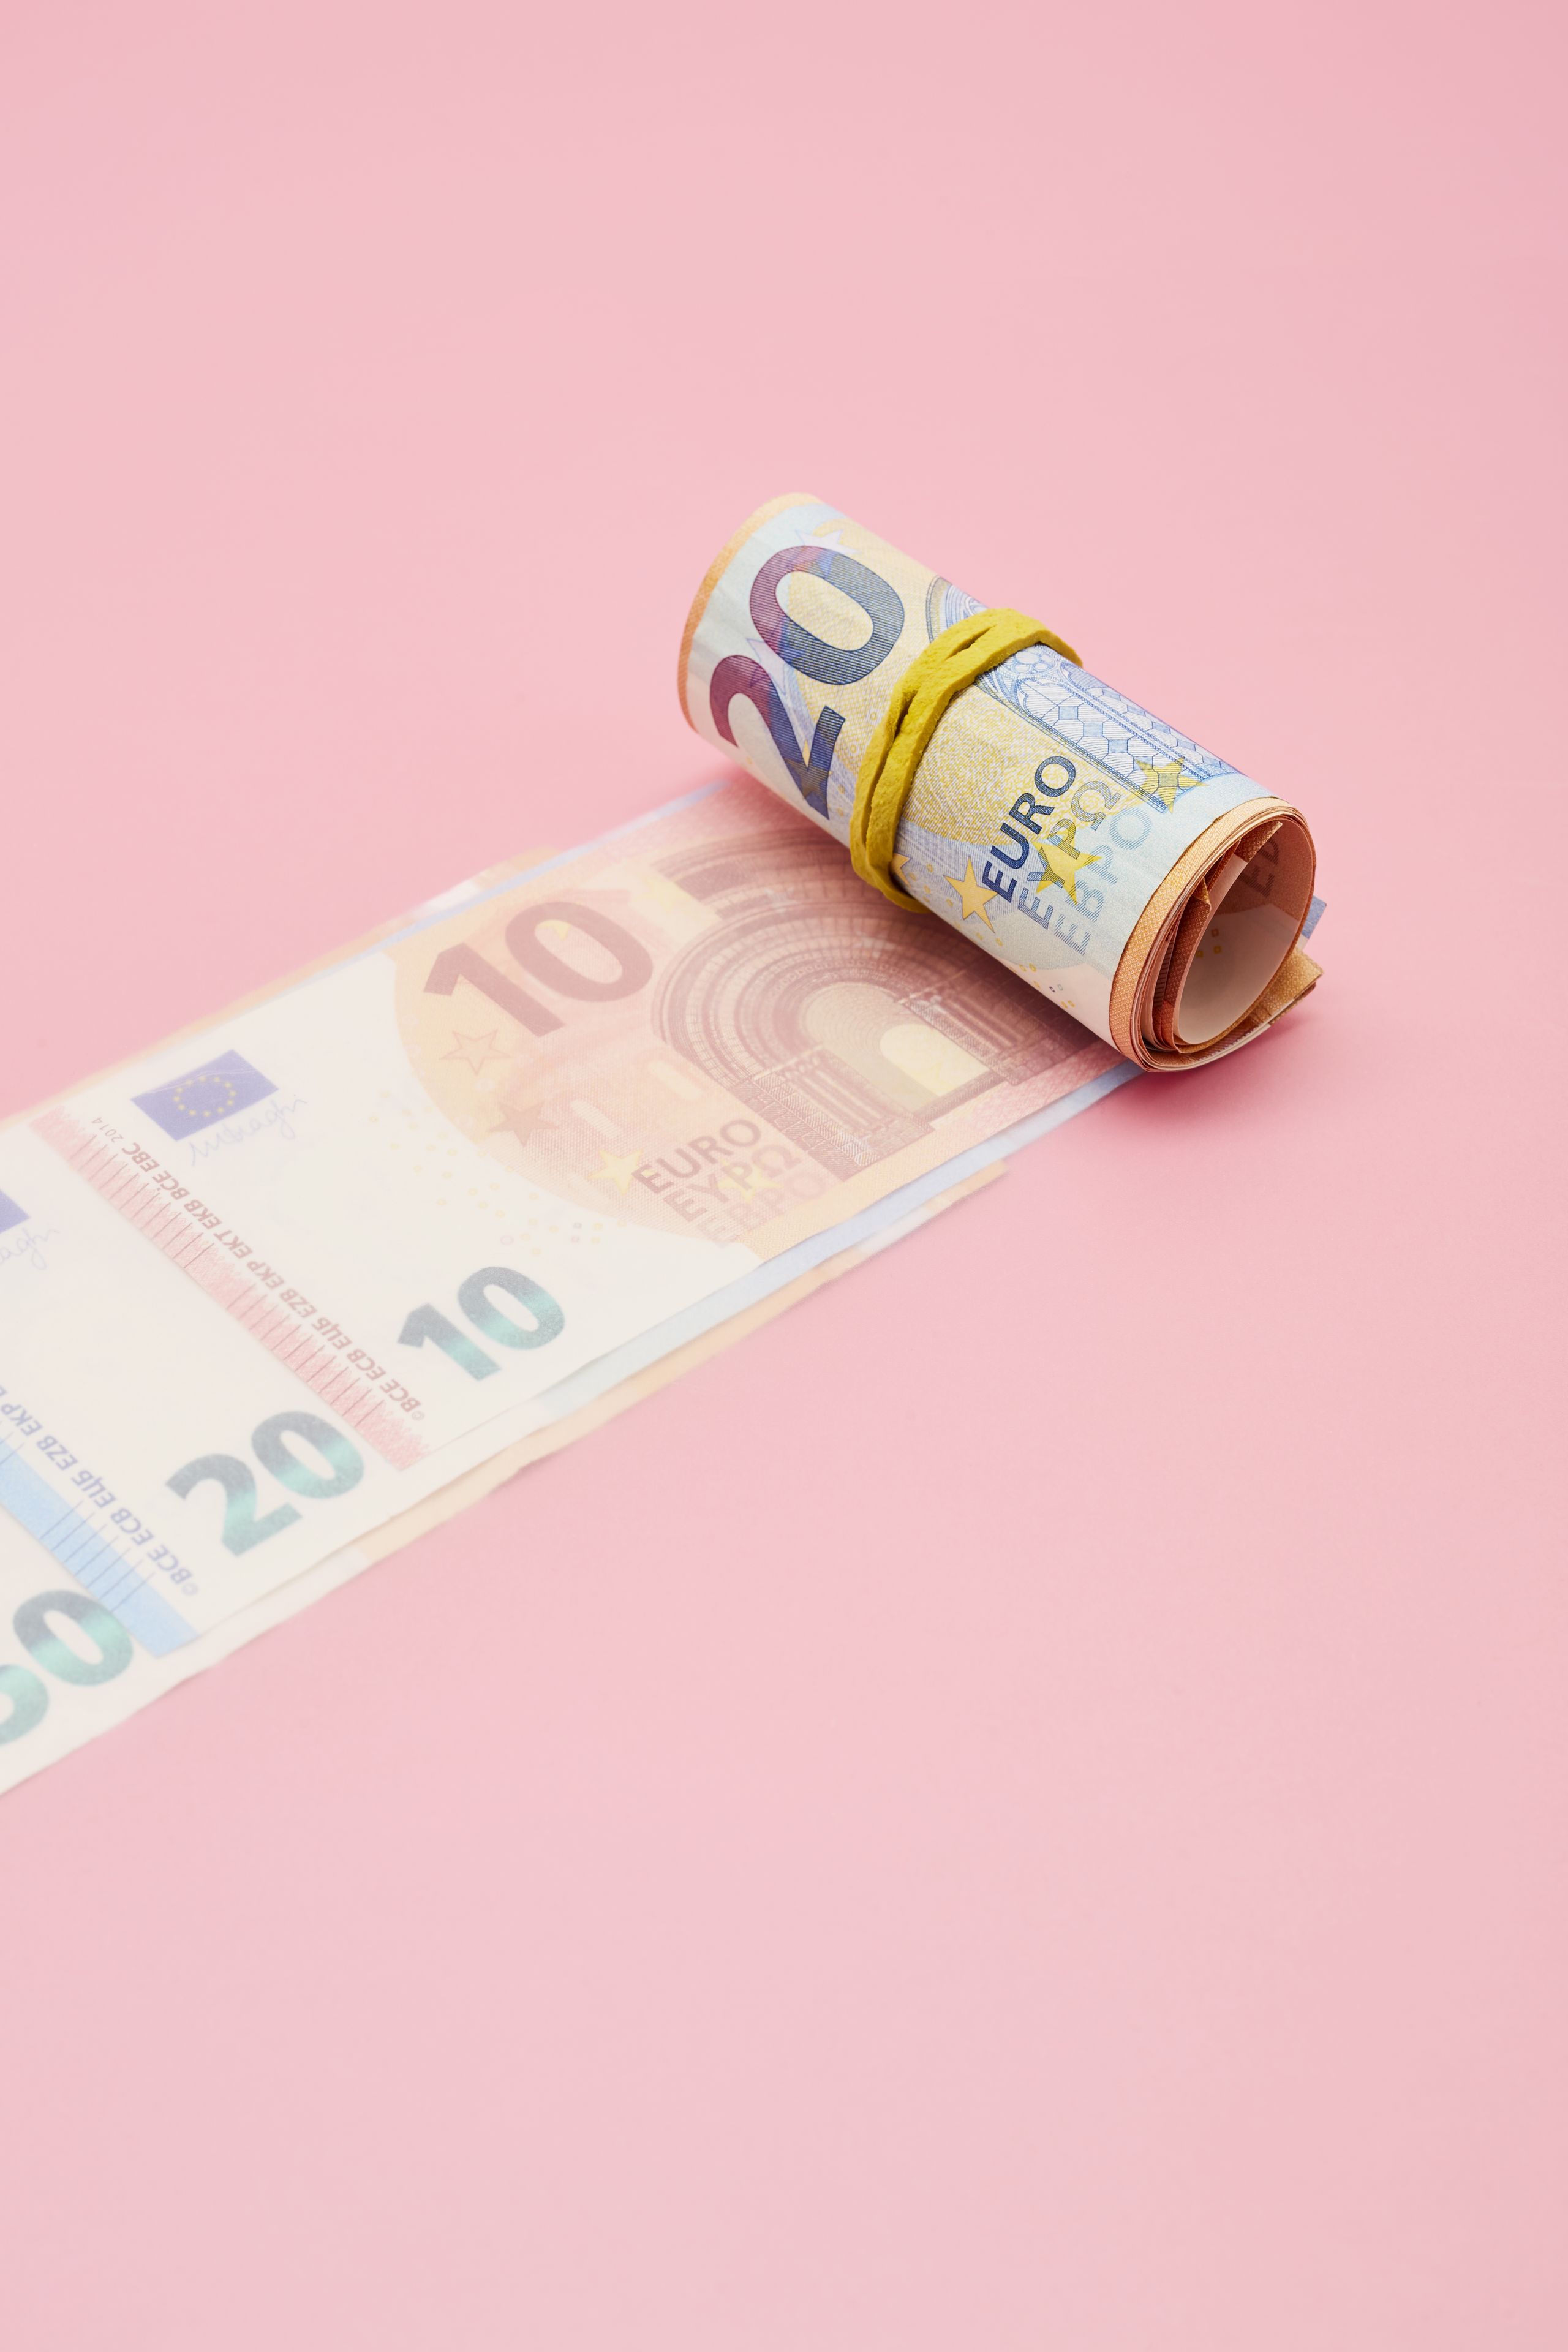 https://hips.hearstapps.com/hmg-prod.s3.amazonaws.com/images/roll-of-euro-banknotes-on-pink-background-royalty-free-image-1575031957.jpg?resize=2560:*